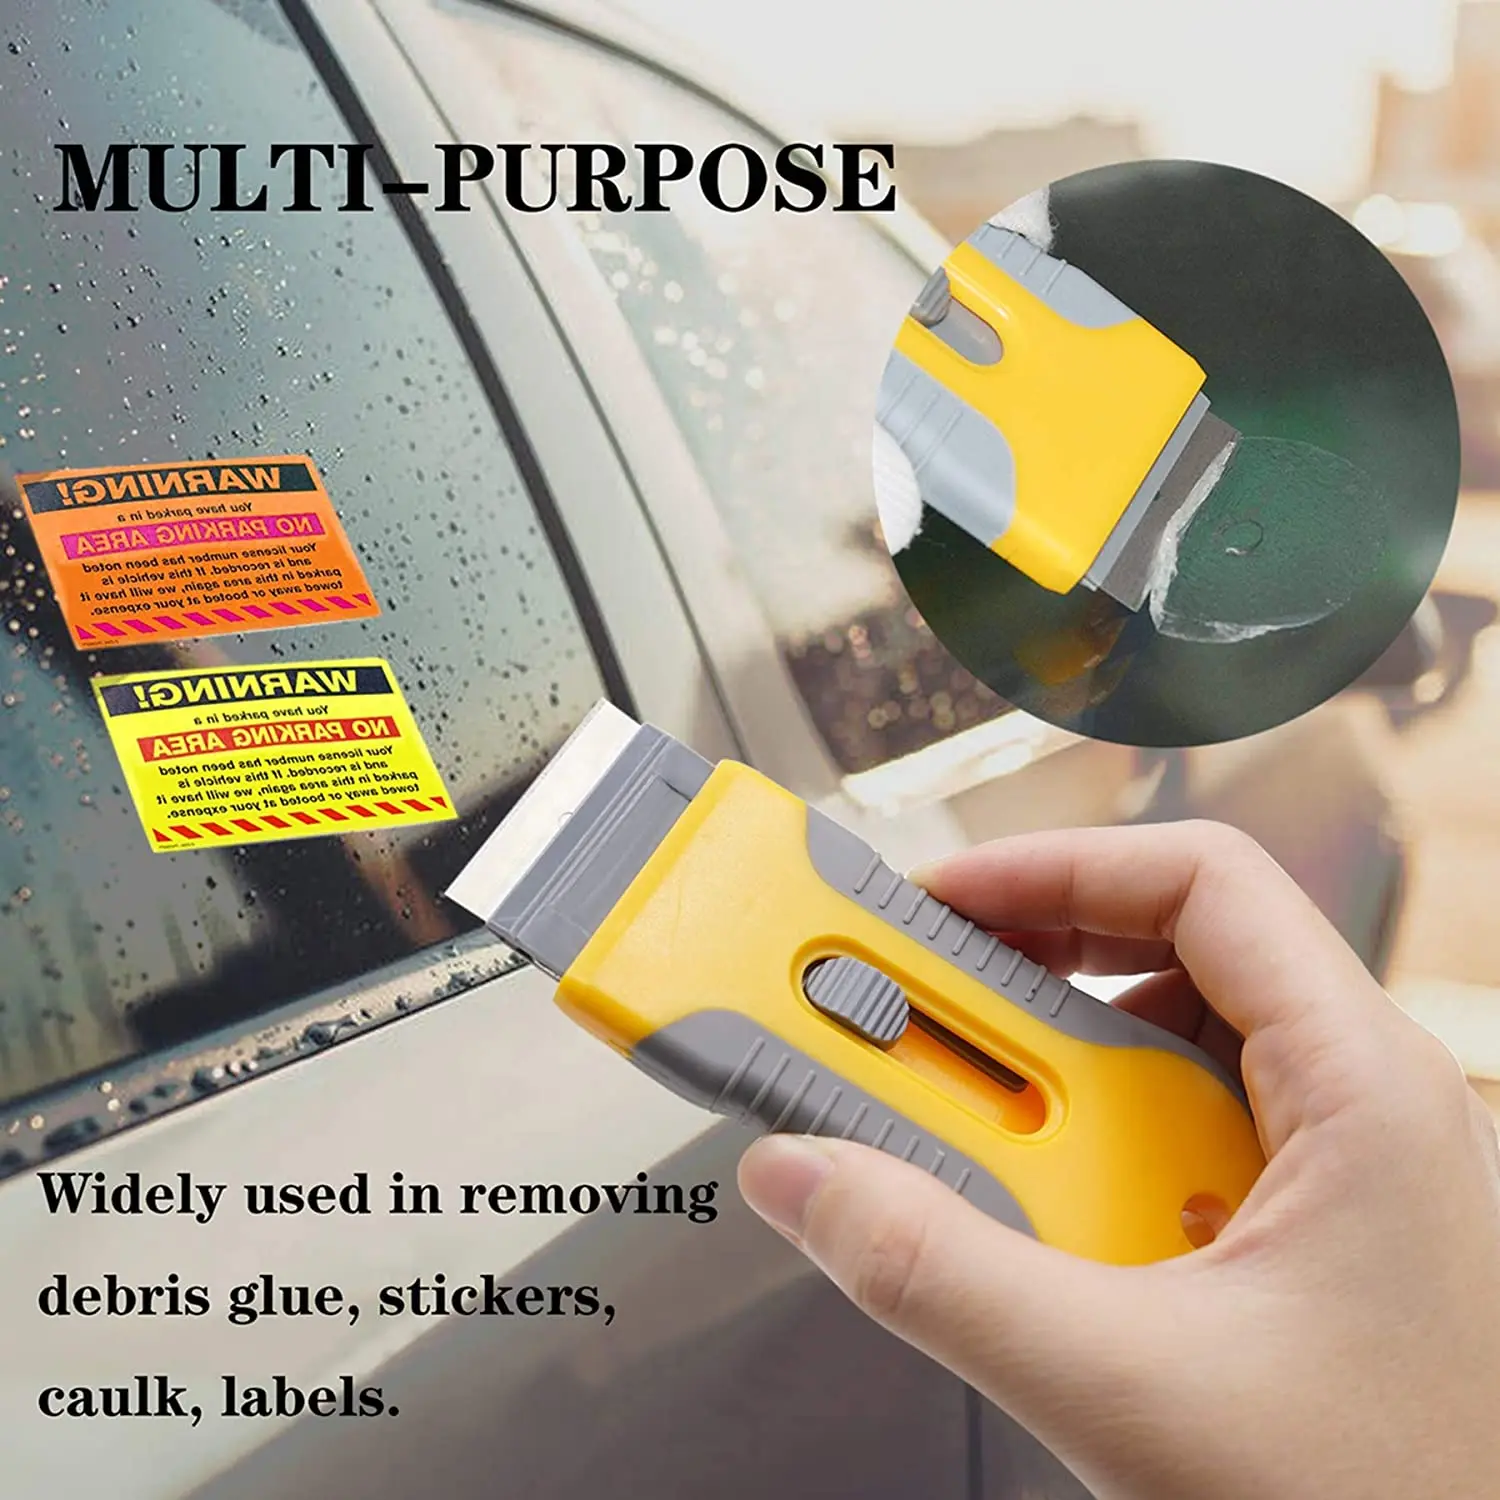 

2pcs Razor Scrapers Scraping Tool Car Window Glass Sticker Viny Film Tool Label Glue Paint Removal Cleaning Squeegee + 40 Blades